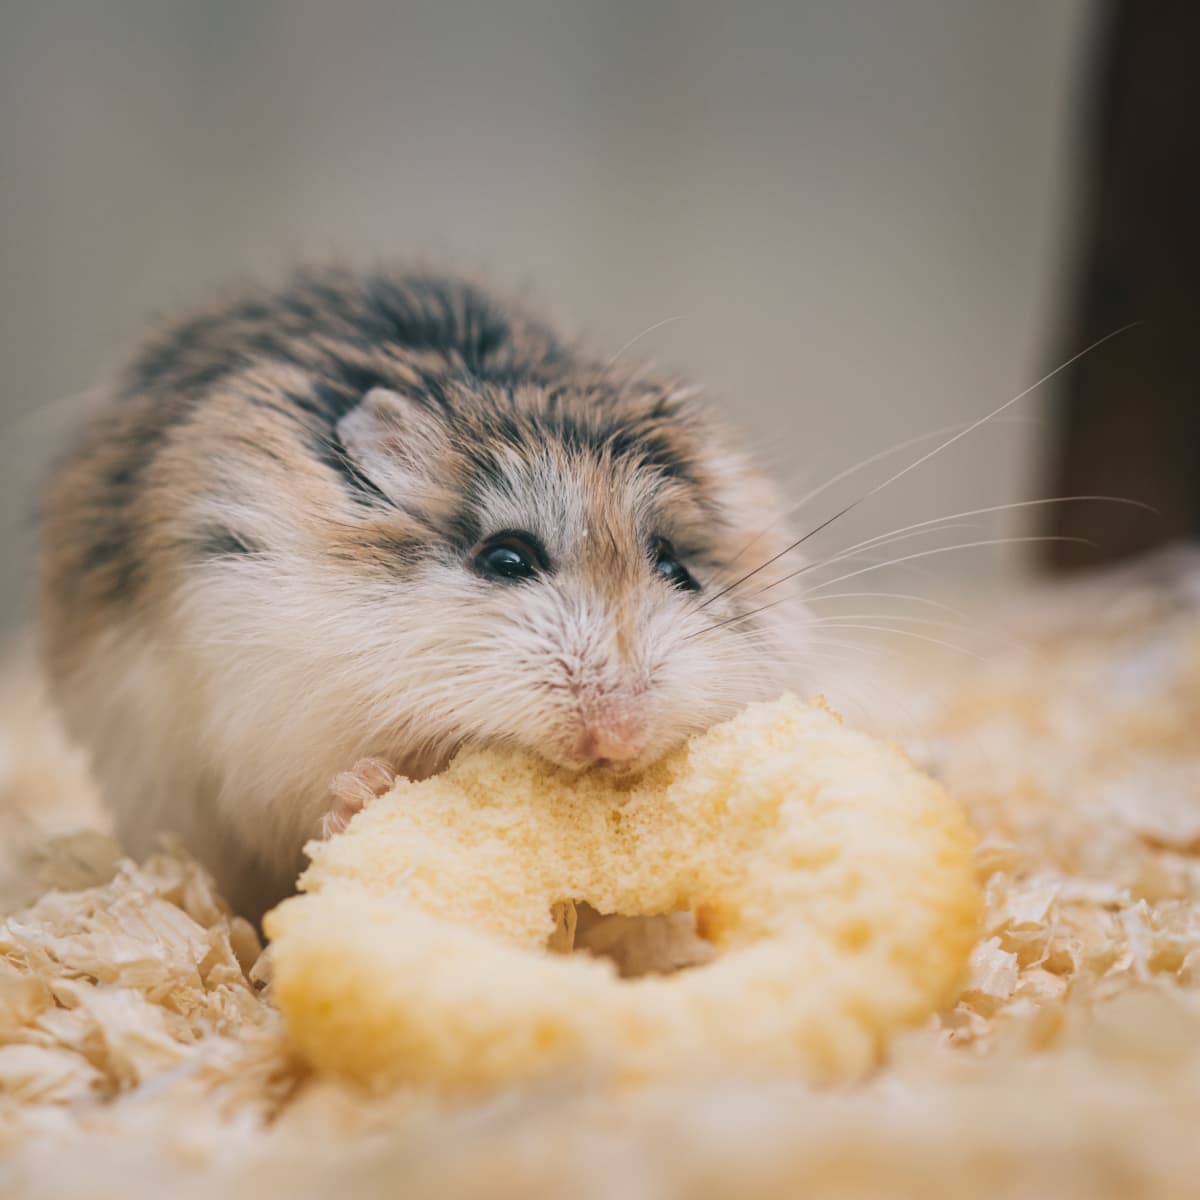 How to Care for and Raise Black Bear Hamsters - PetHelpful